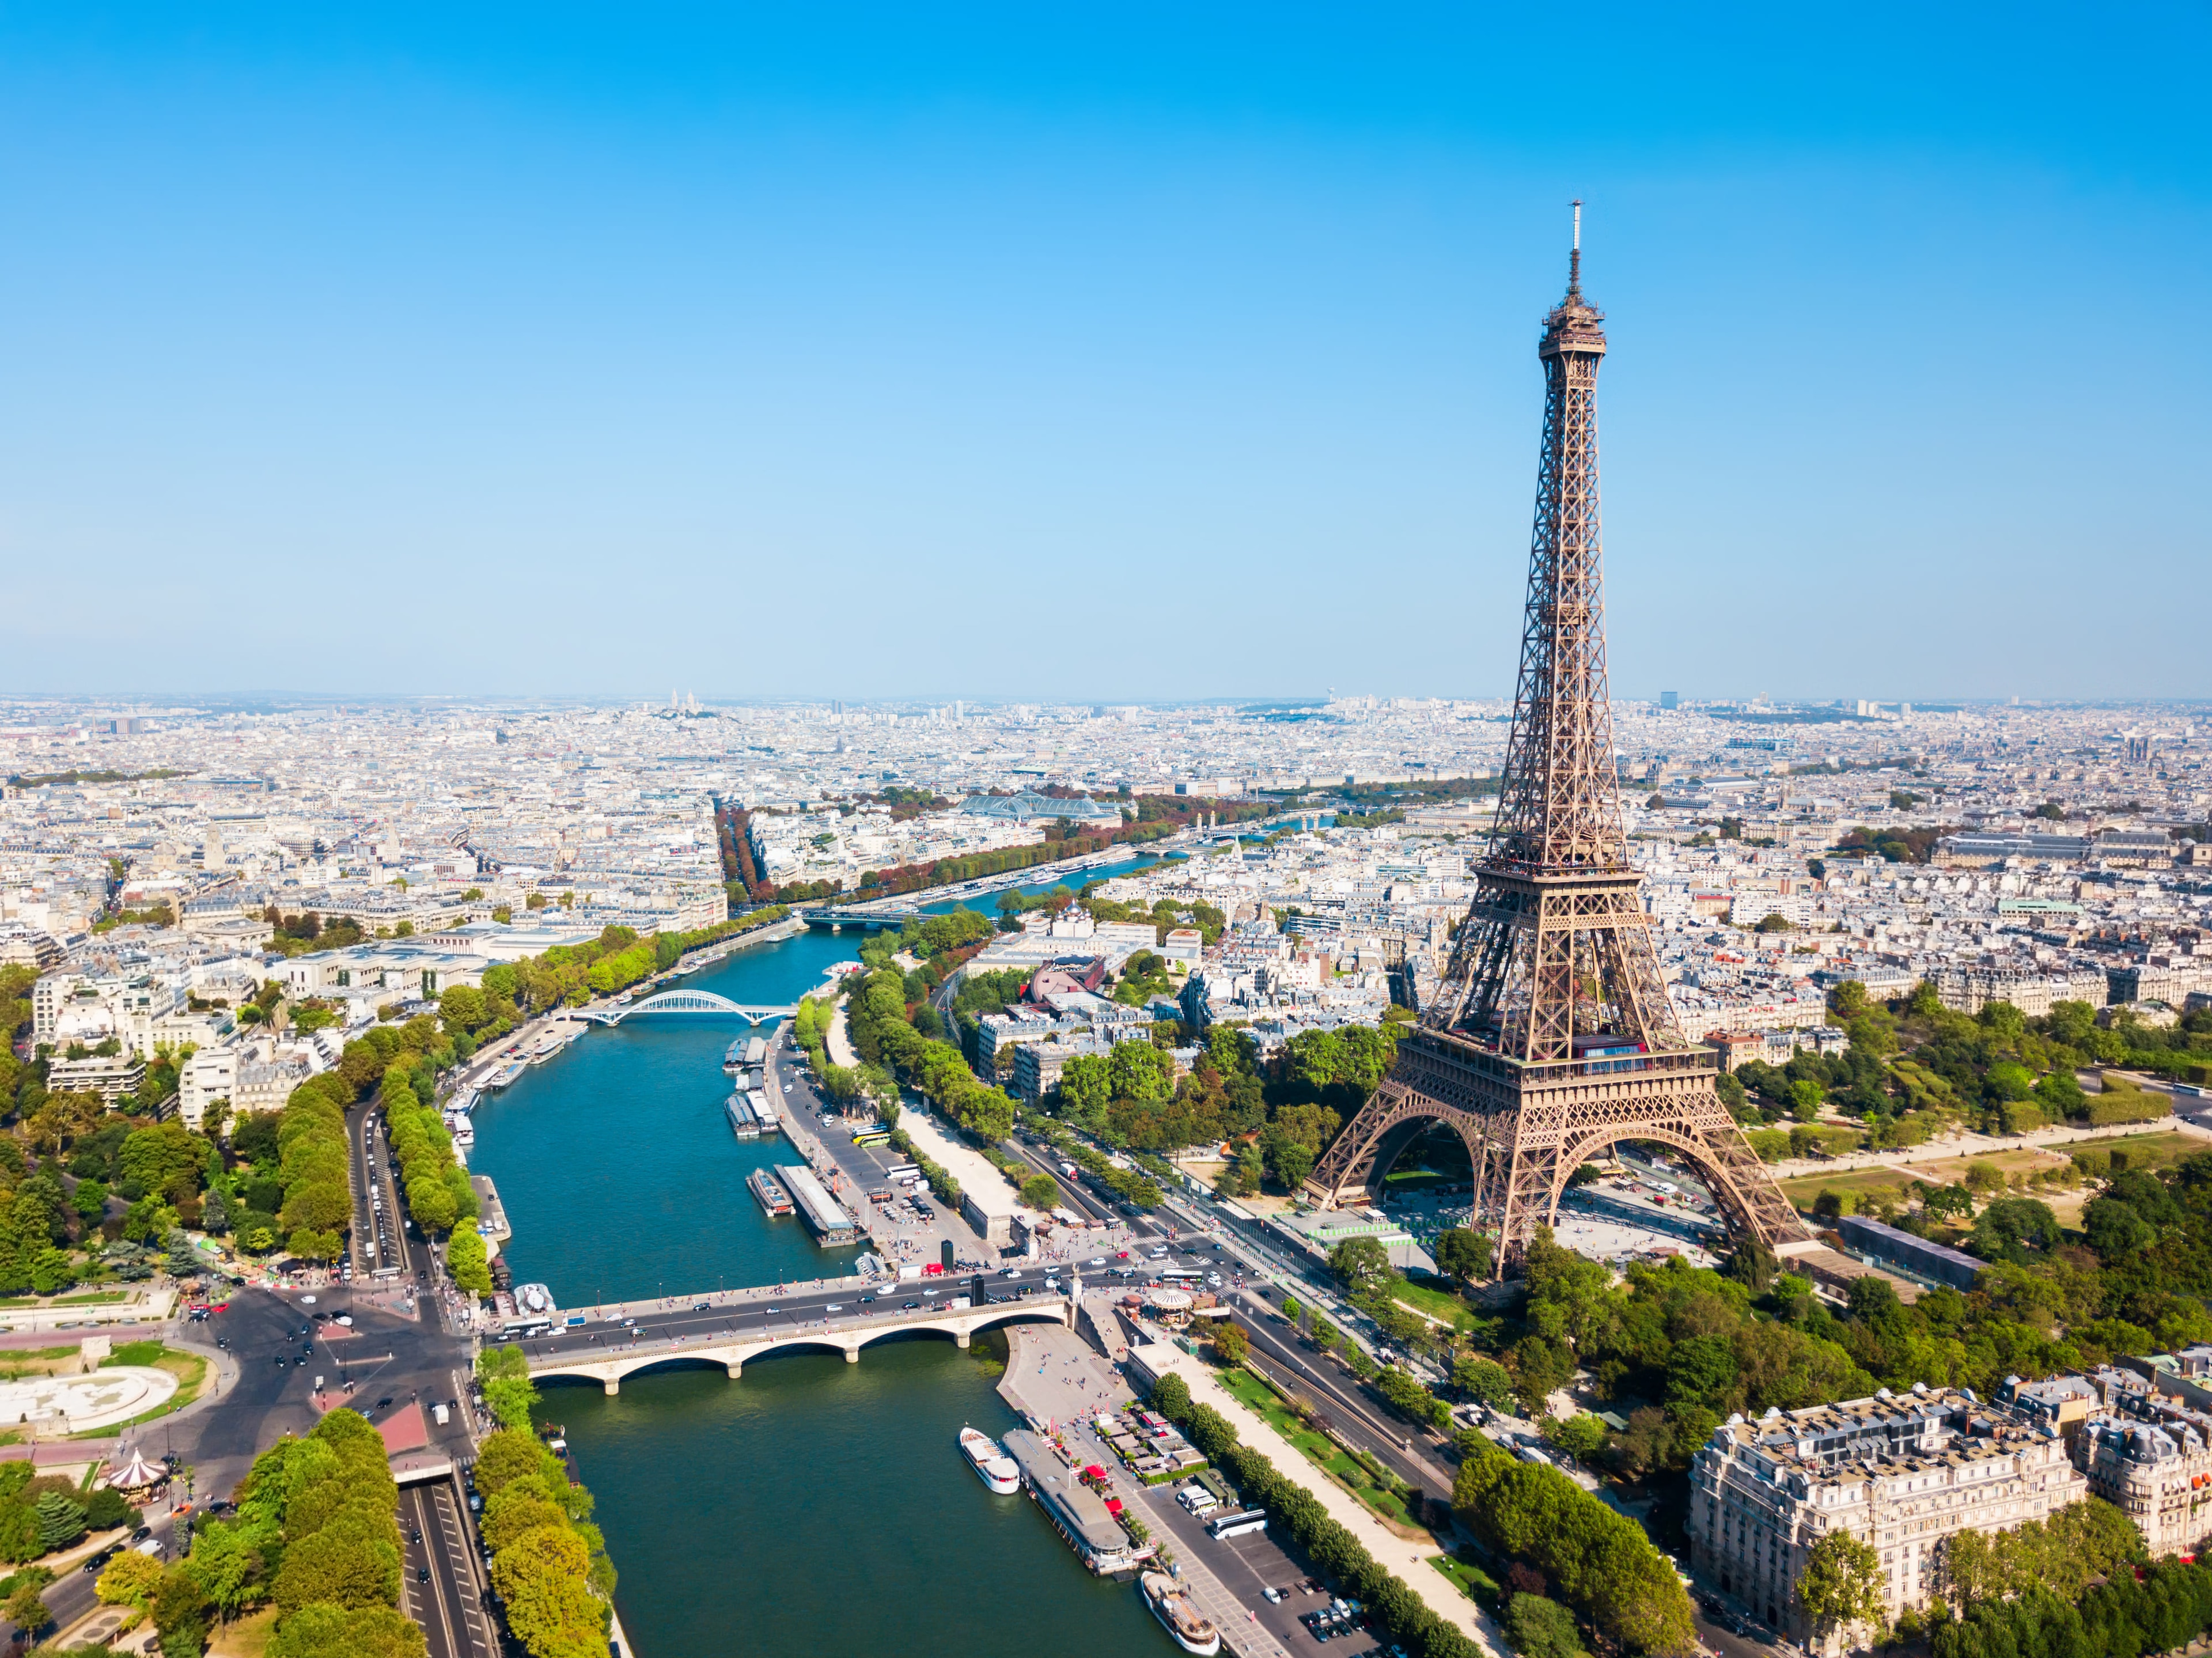 How many Eiffel Towers are there in the world?